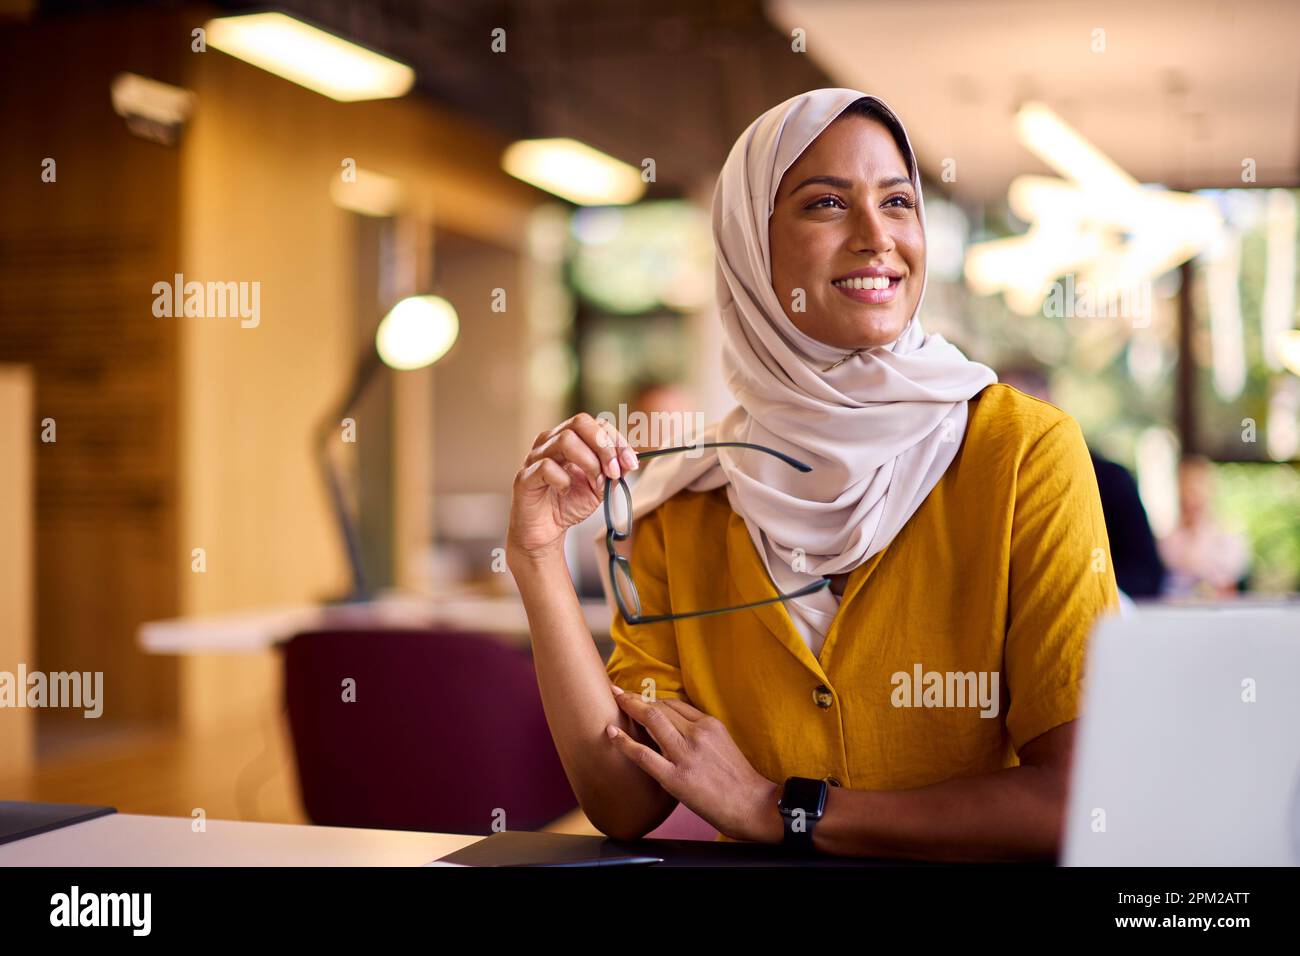 Mature Businesswoman Wearing Headscarf Working On Laptop At Desk In Office Stock Photo